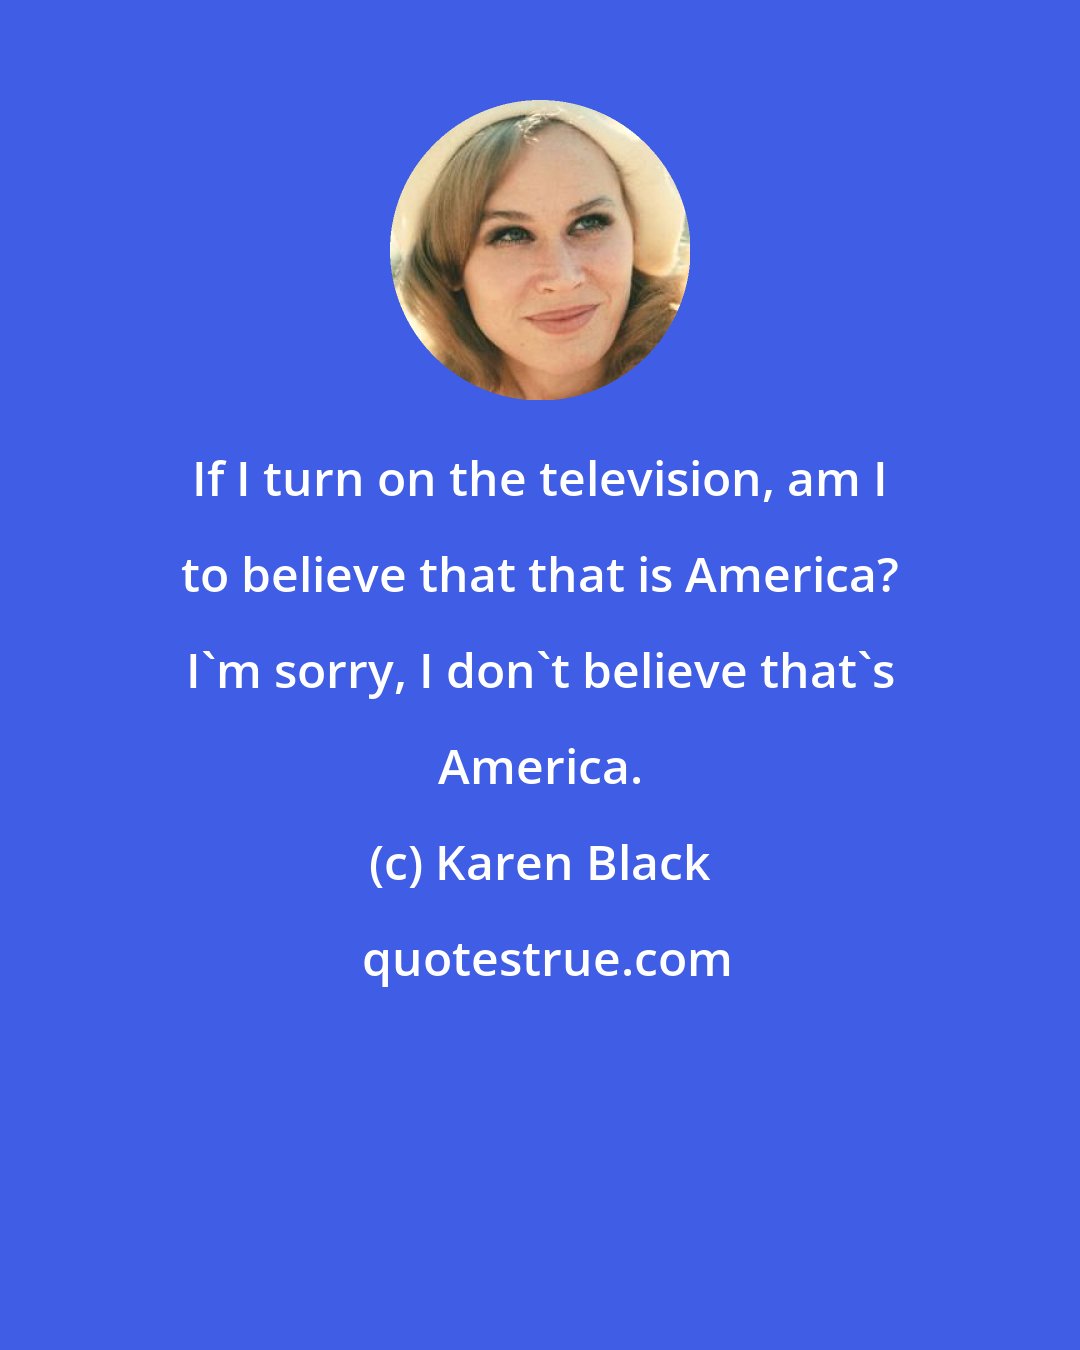 Karen Black: If I turn on the television, am I to believe that that is America? I'm sorry, I don't believe that's America.